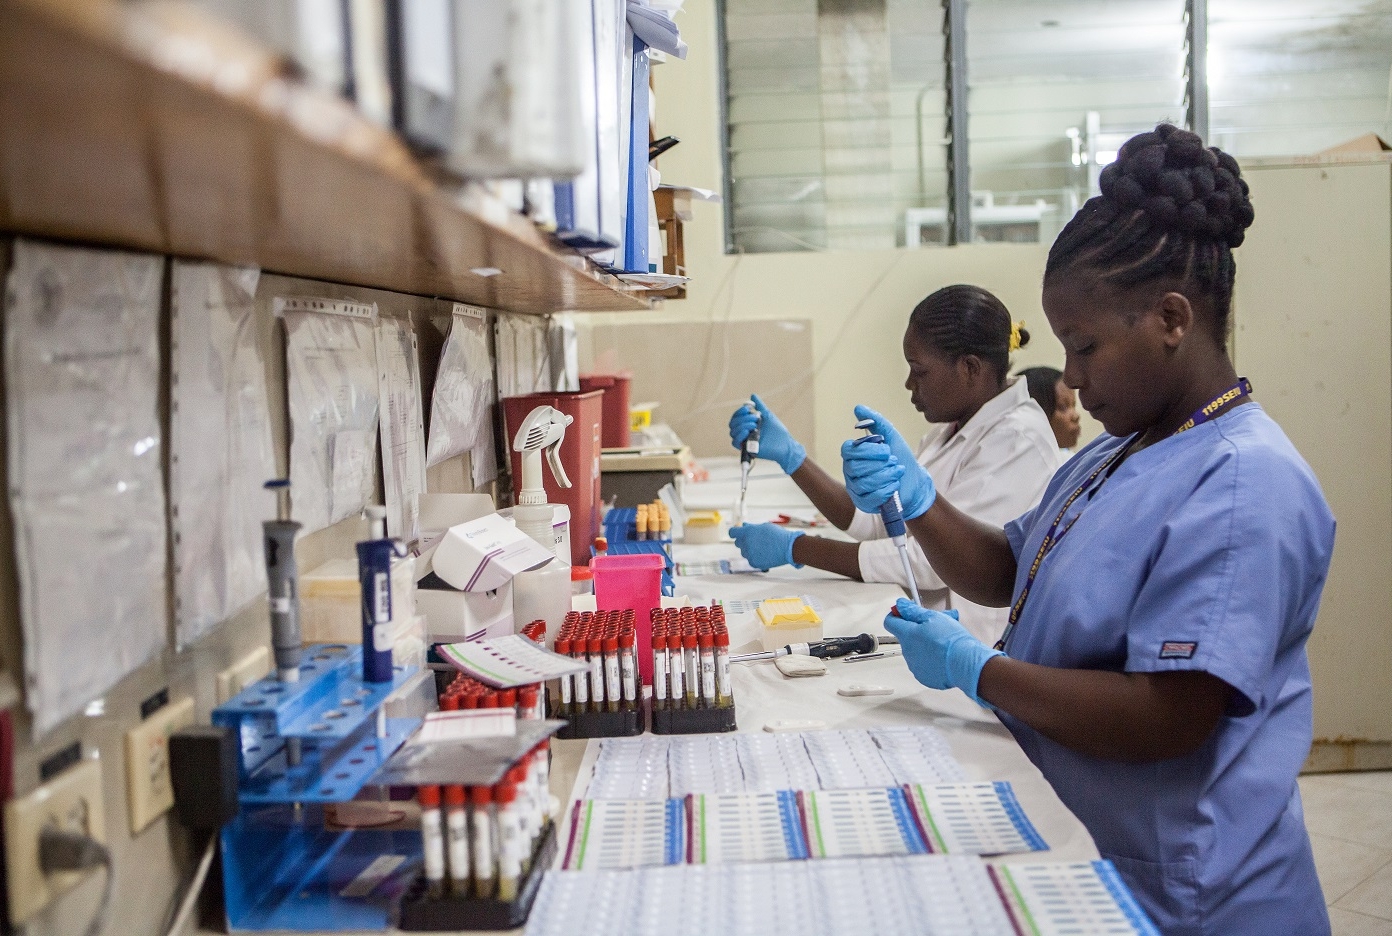 Blood being tested in Port-au-Prince, Haiti at the GHESKIO lab. Photo credit: Bahare Khodabande